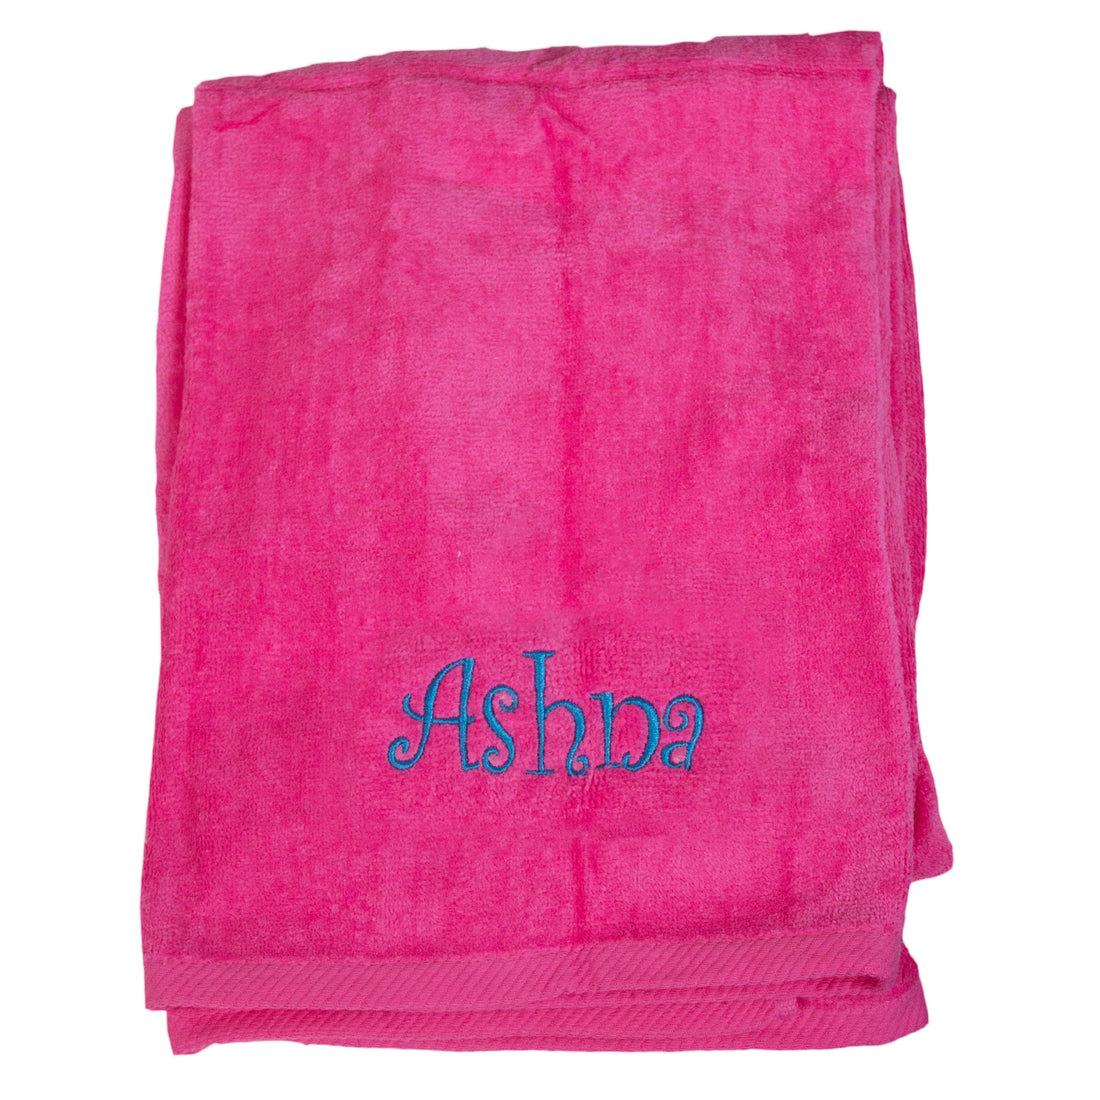 Personalized Beach Towel Pink 